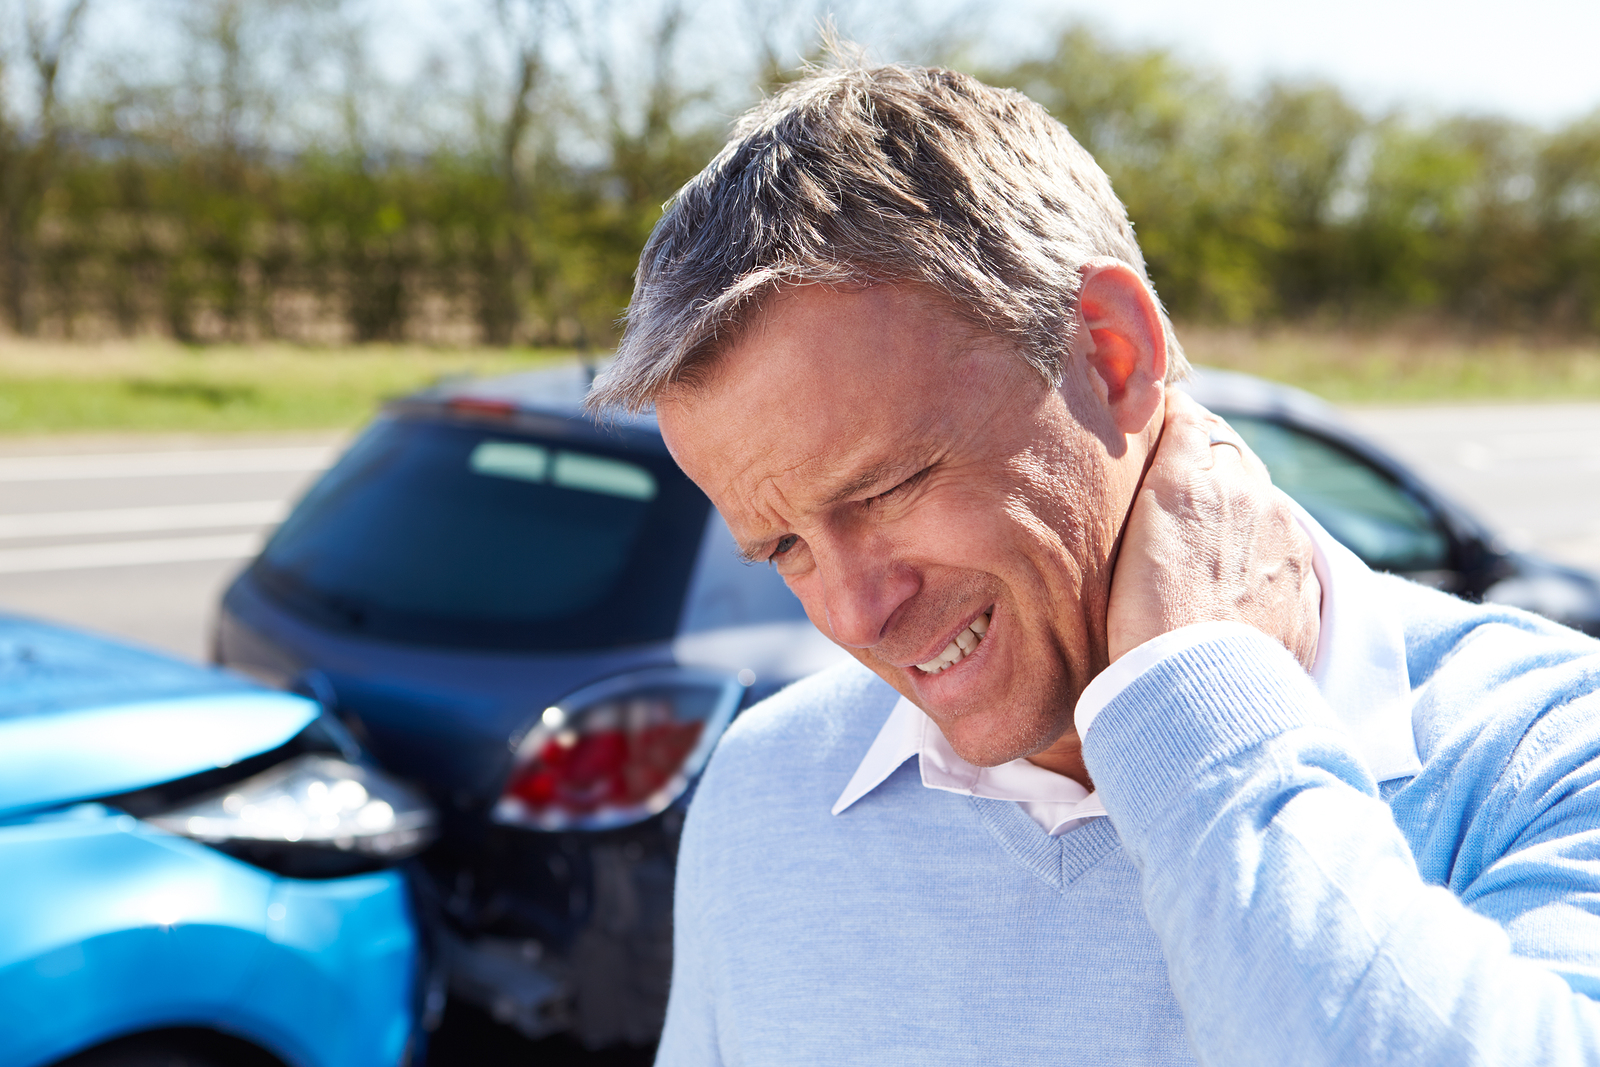 Can I Switch My Auto Accident Lawyer in The Middle of My Case?